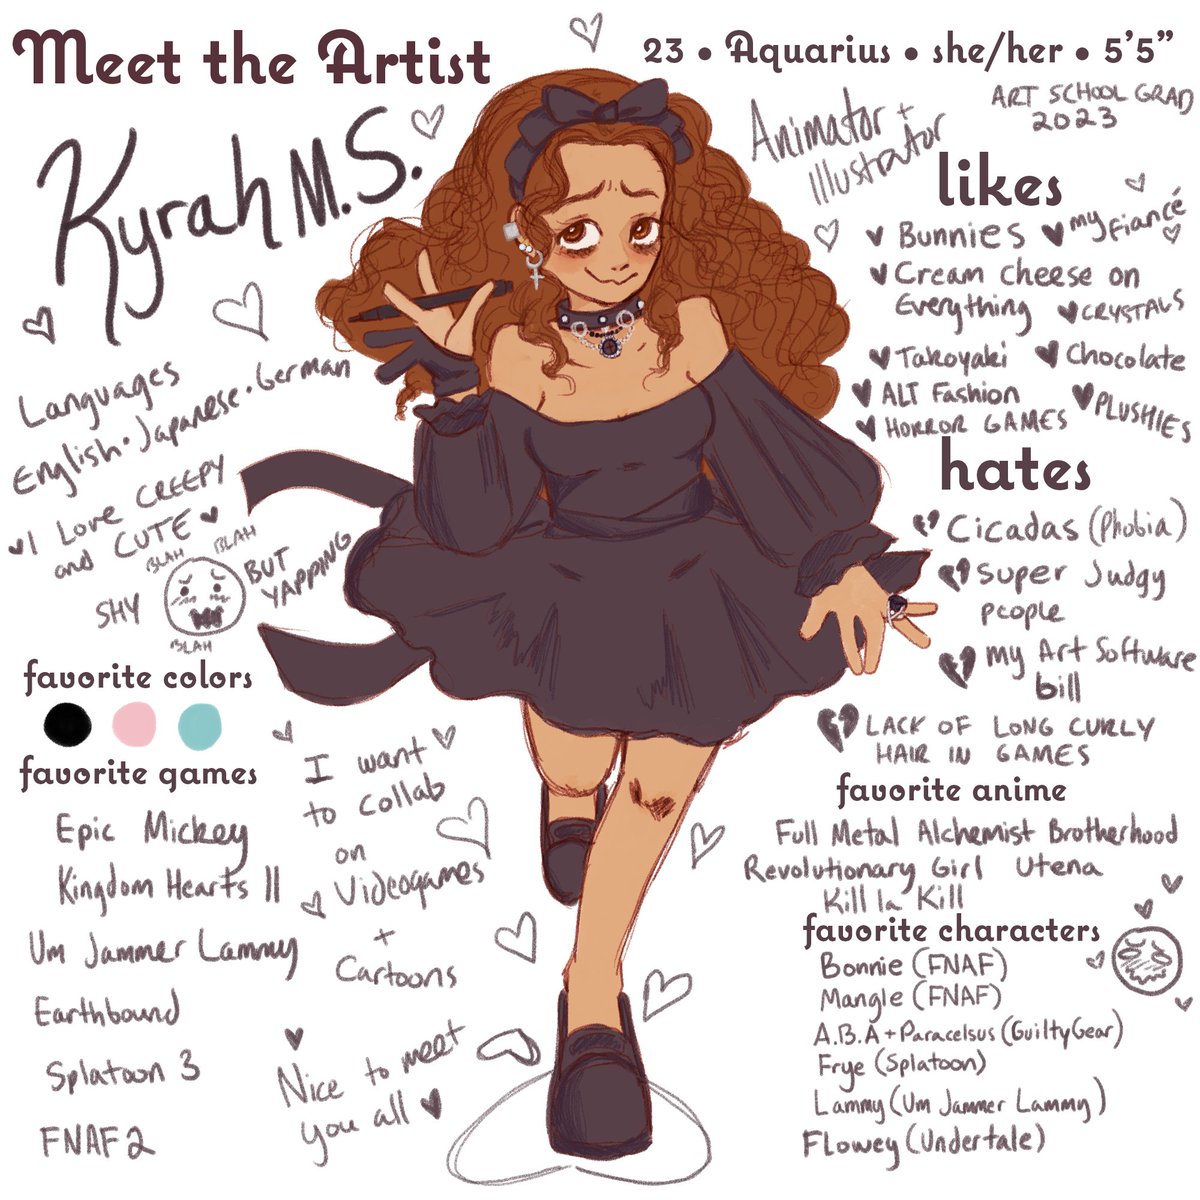 If you want to know who is contributing to the freaky Aba art recently. Thank you and welcome to my brainrot space #meettheArtist ask me anything 🖤